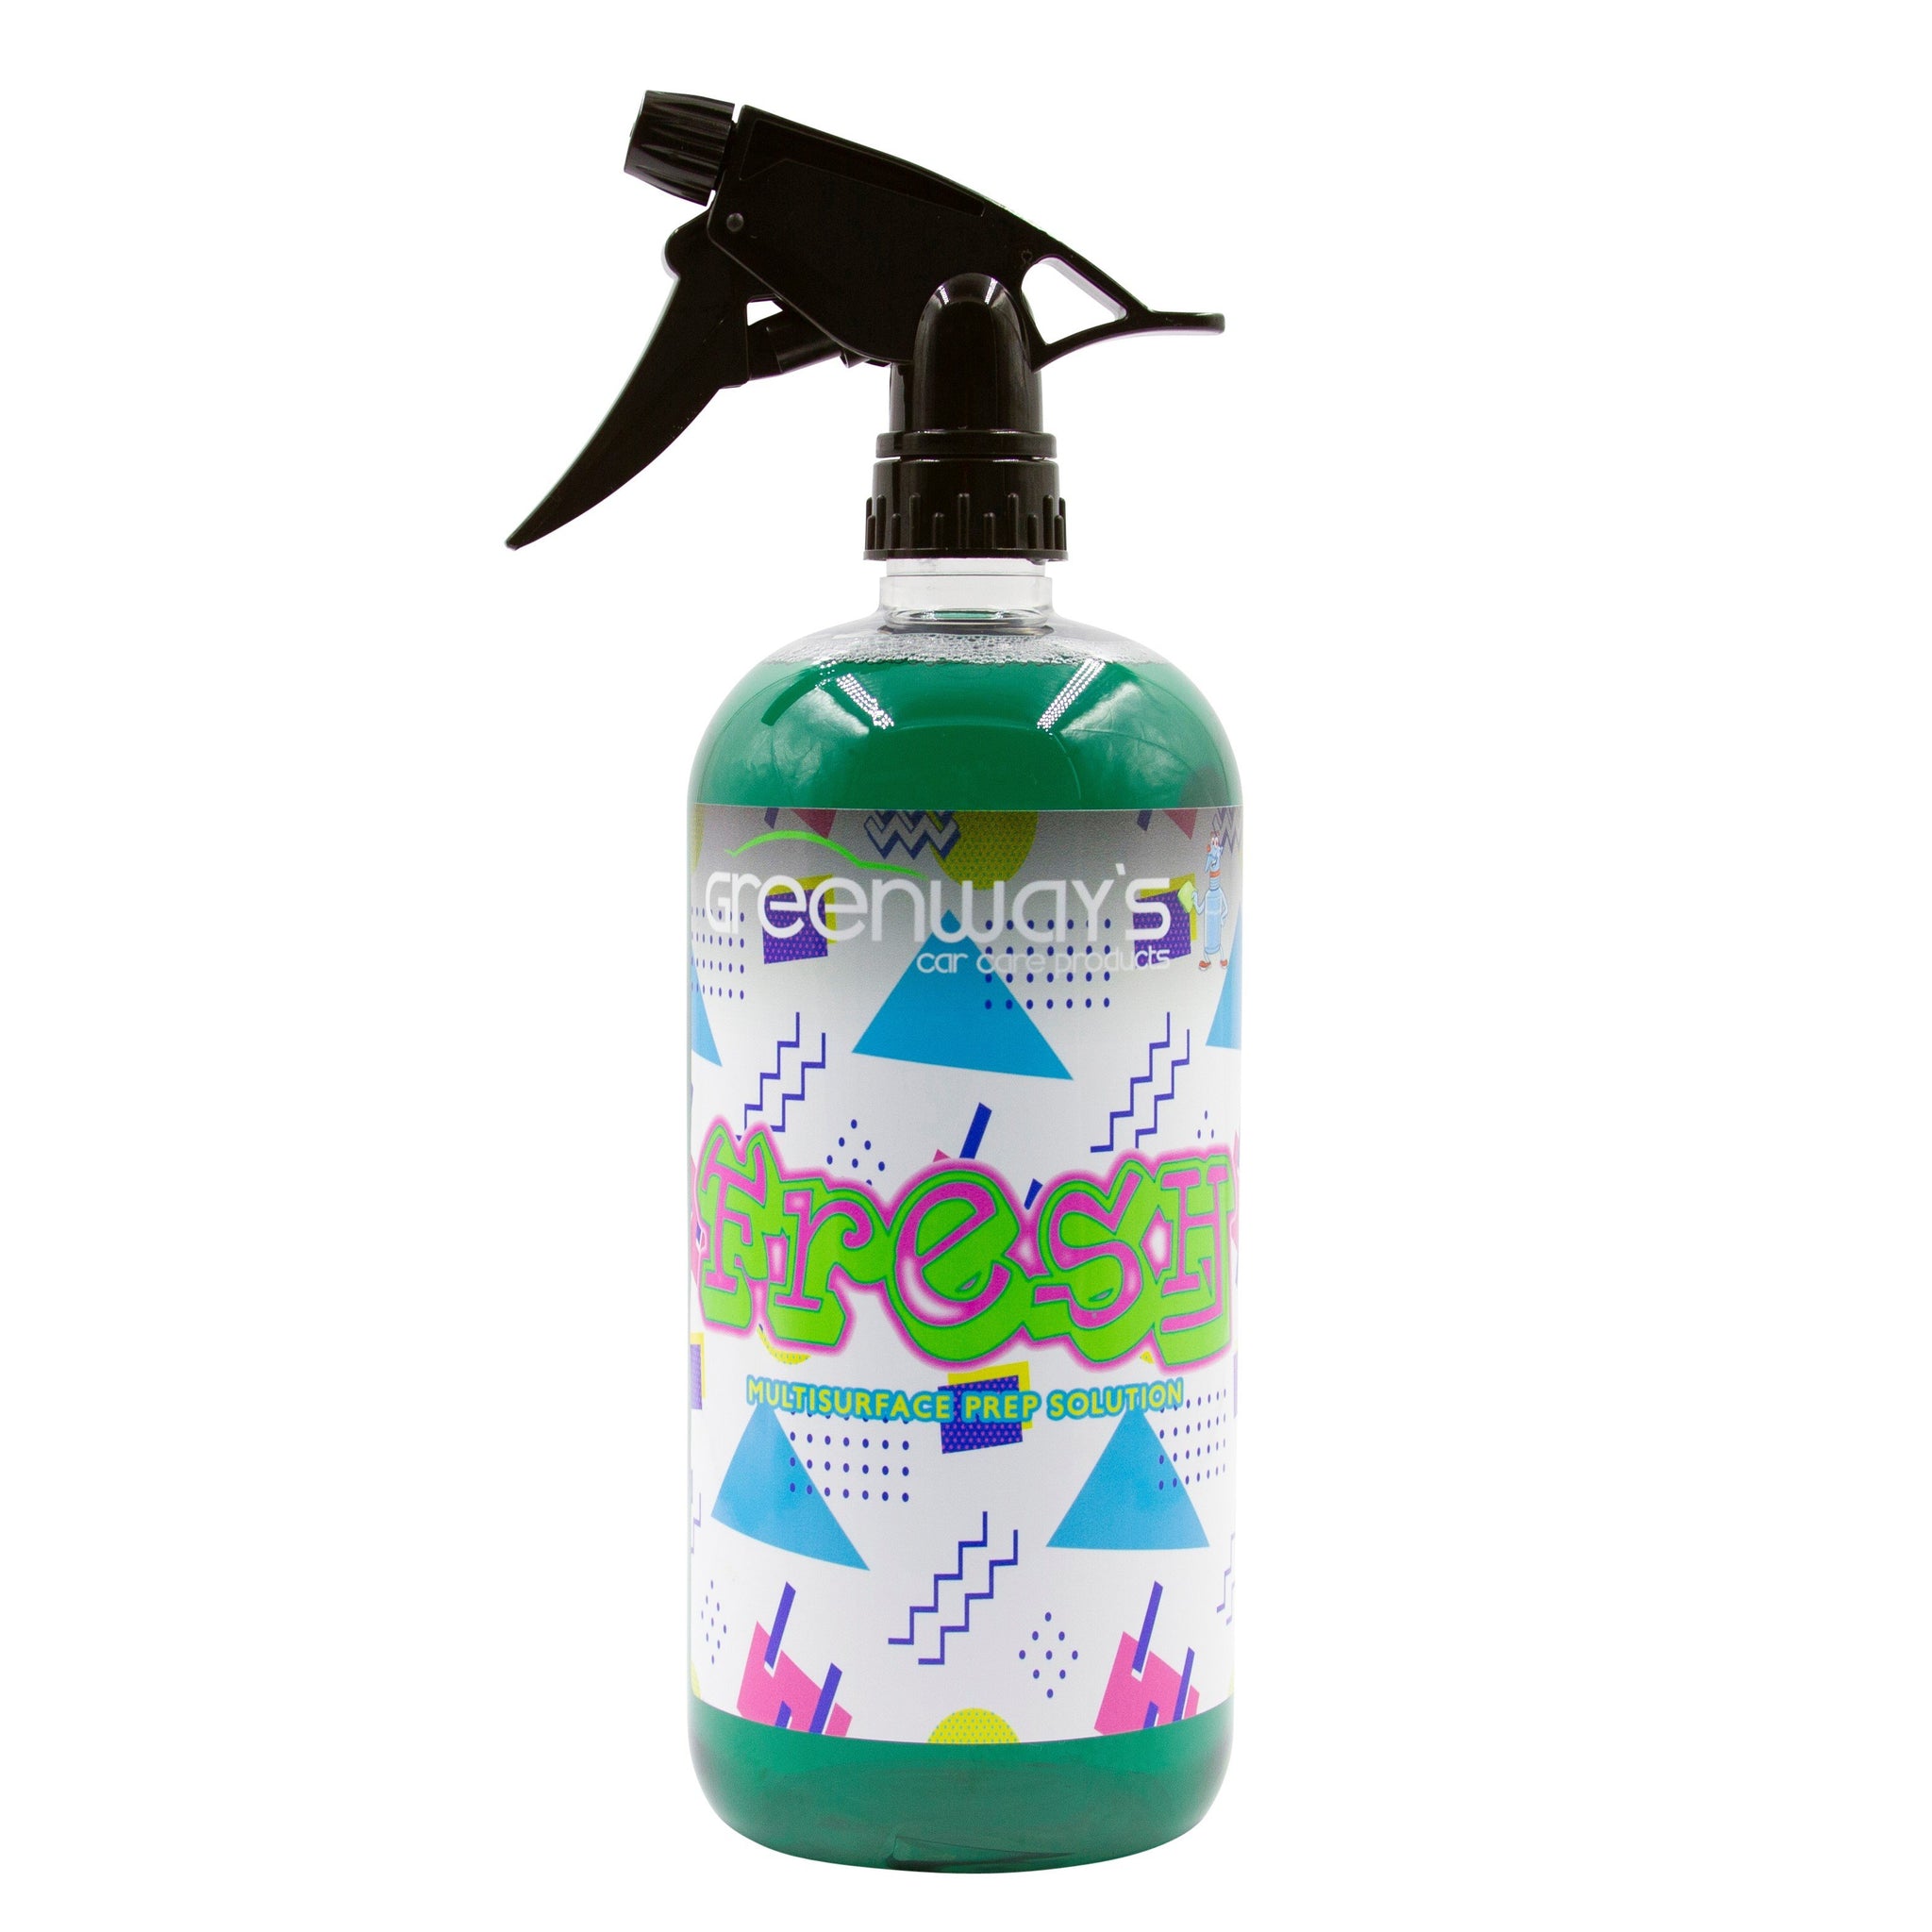 Greenway’s Fresh, car paint preparation, multi-surface cleaning solution, buffing pad cleaner, custom scented, 32 ounces.